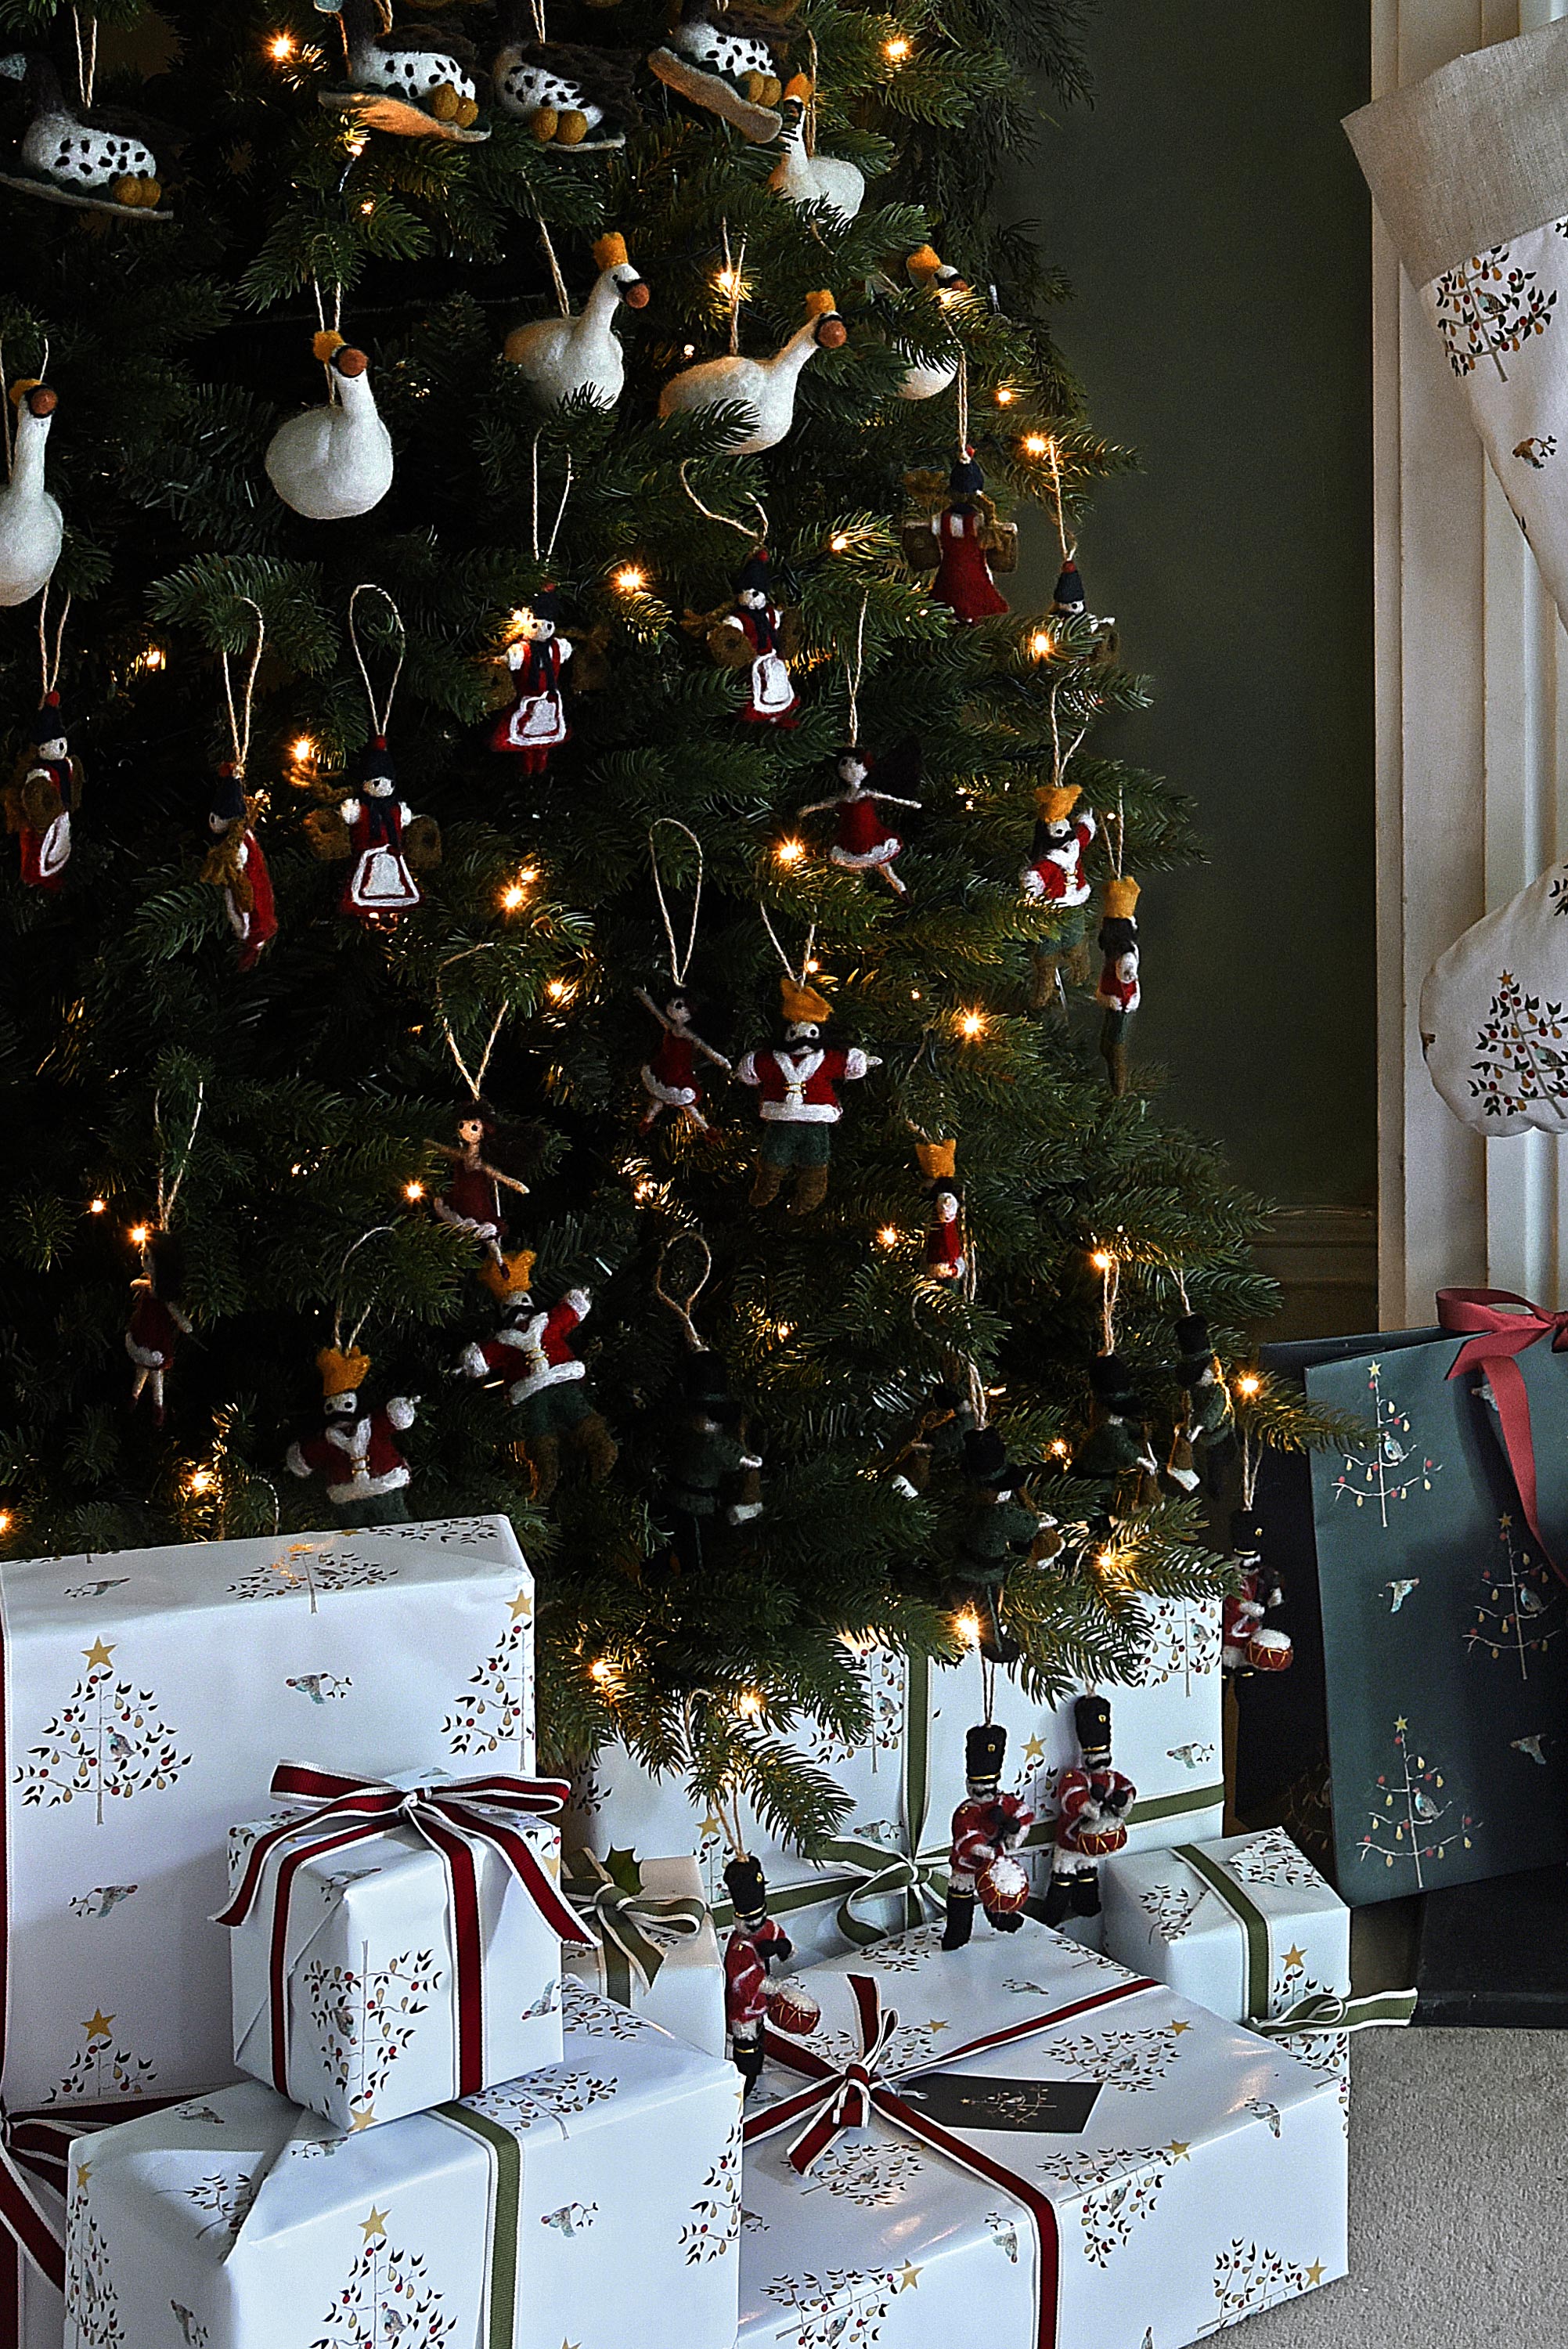 New Sophie Allport Christmas Collection - Partridge In A Pear Tree